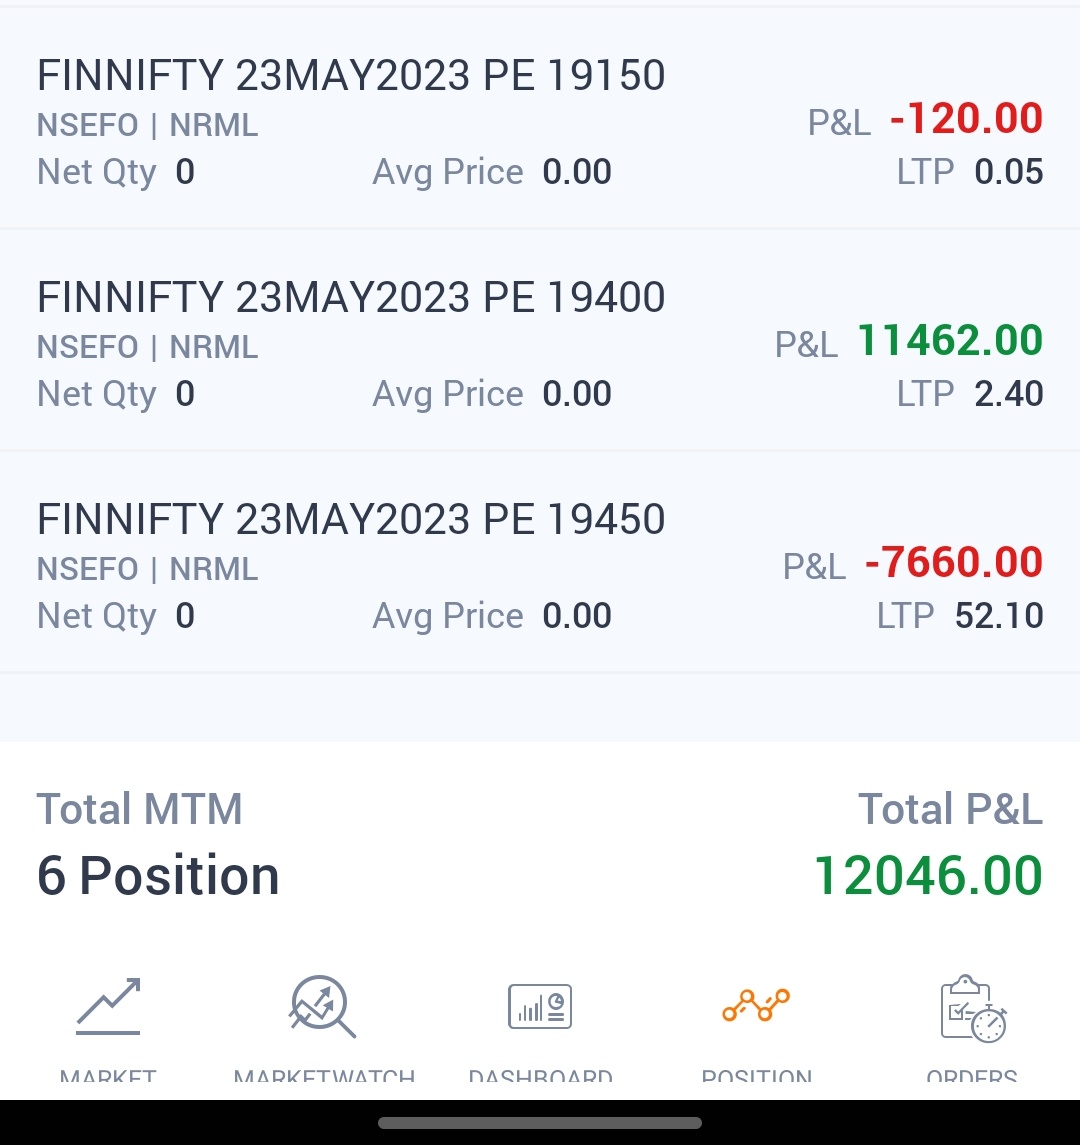 Smooth day💚

#trading #trader #finnifty #OptionsTrading #options #stocks #StockMarketindia #stockmarket #systemtrading